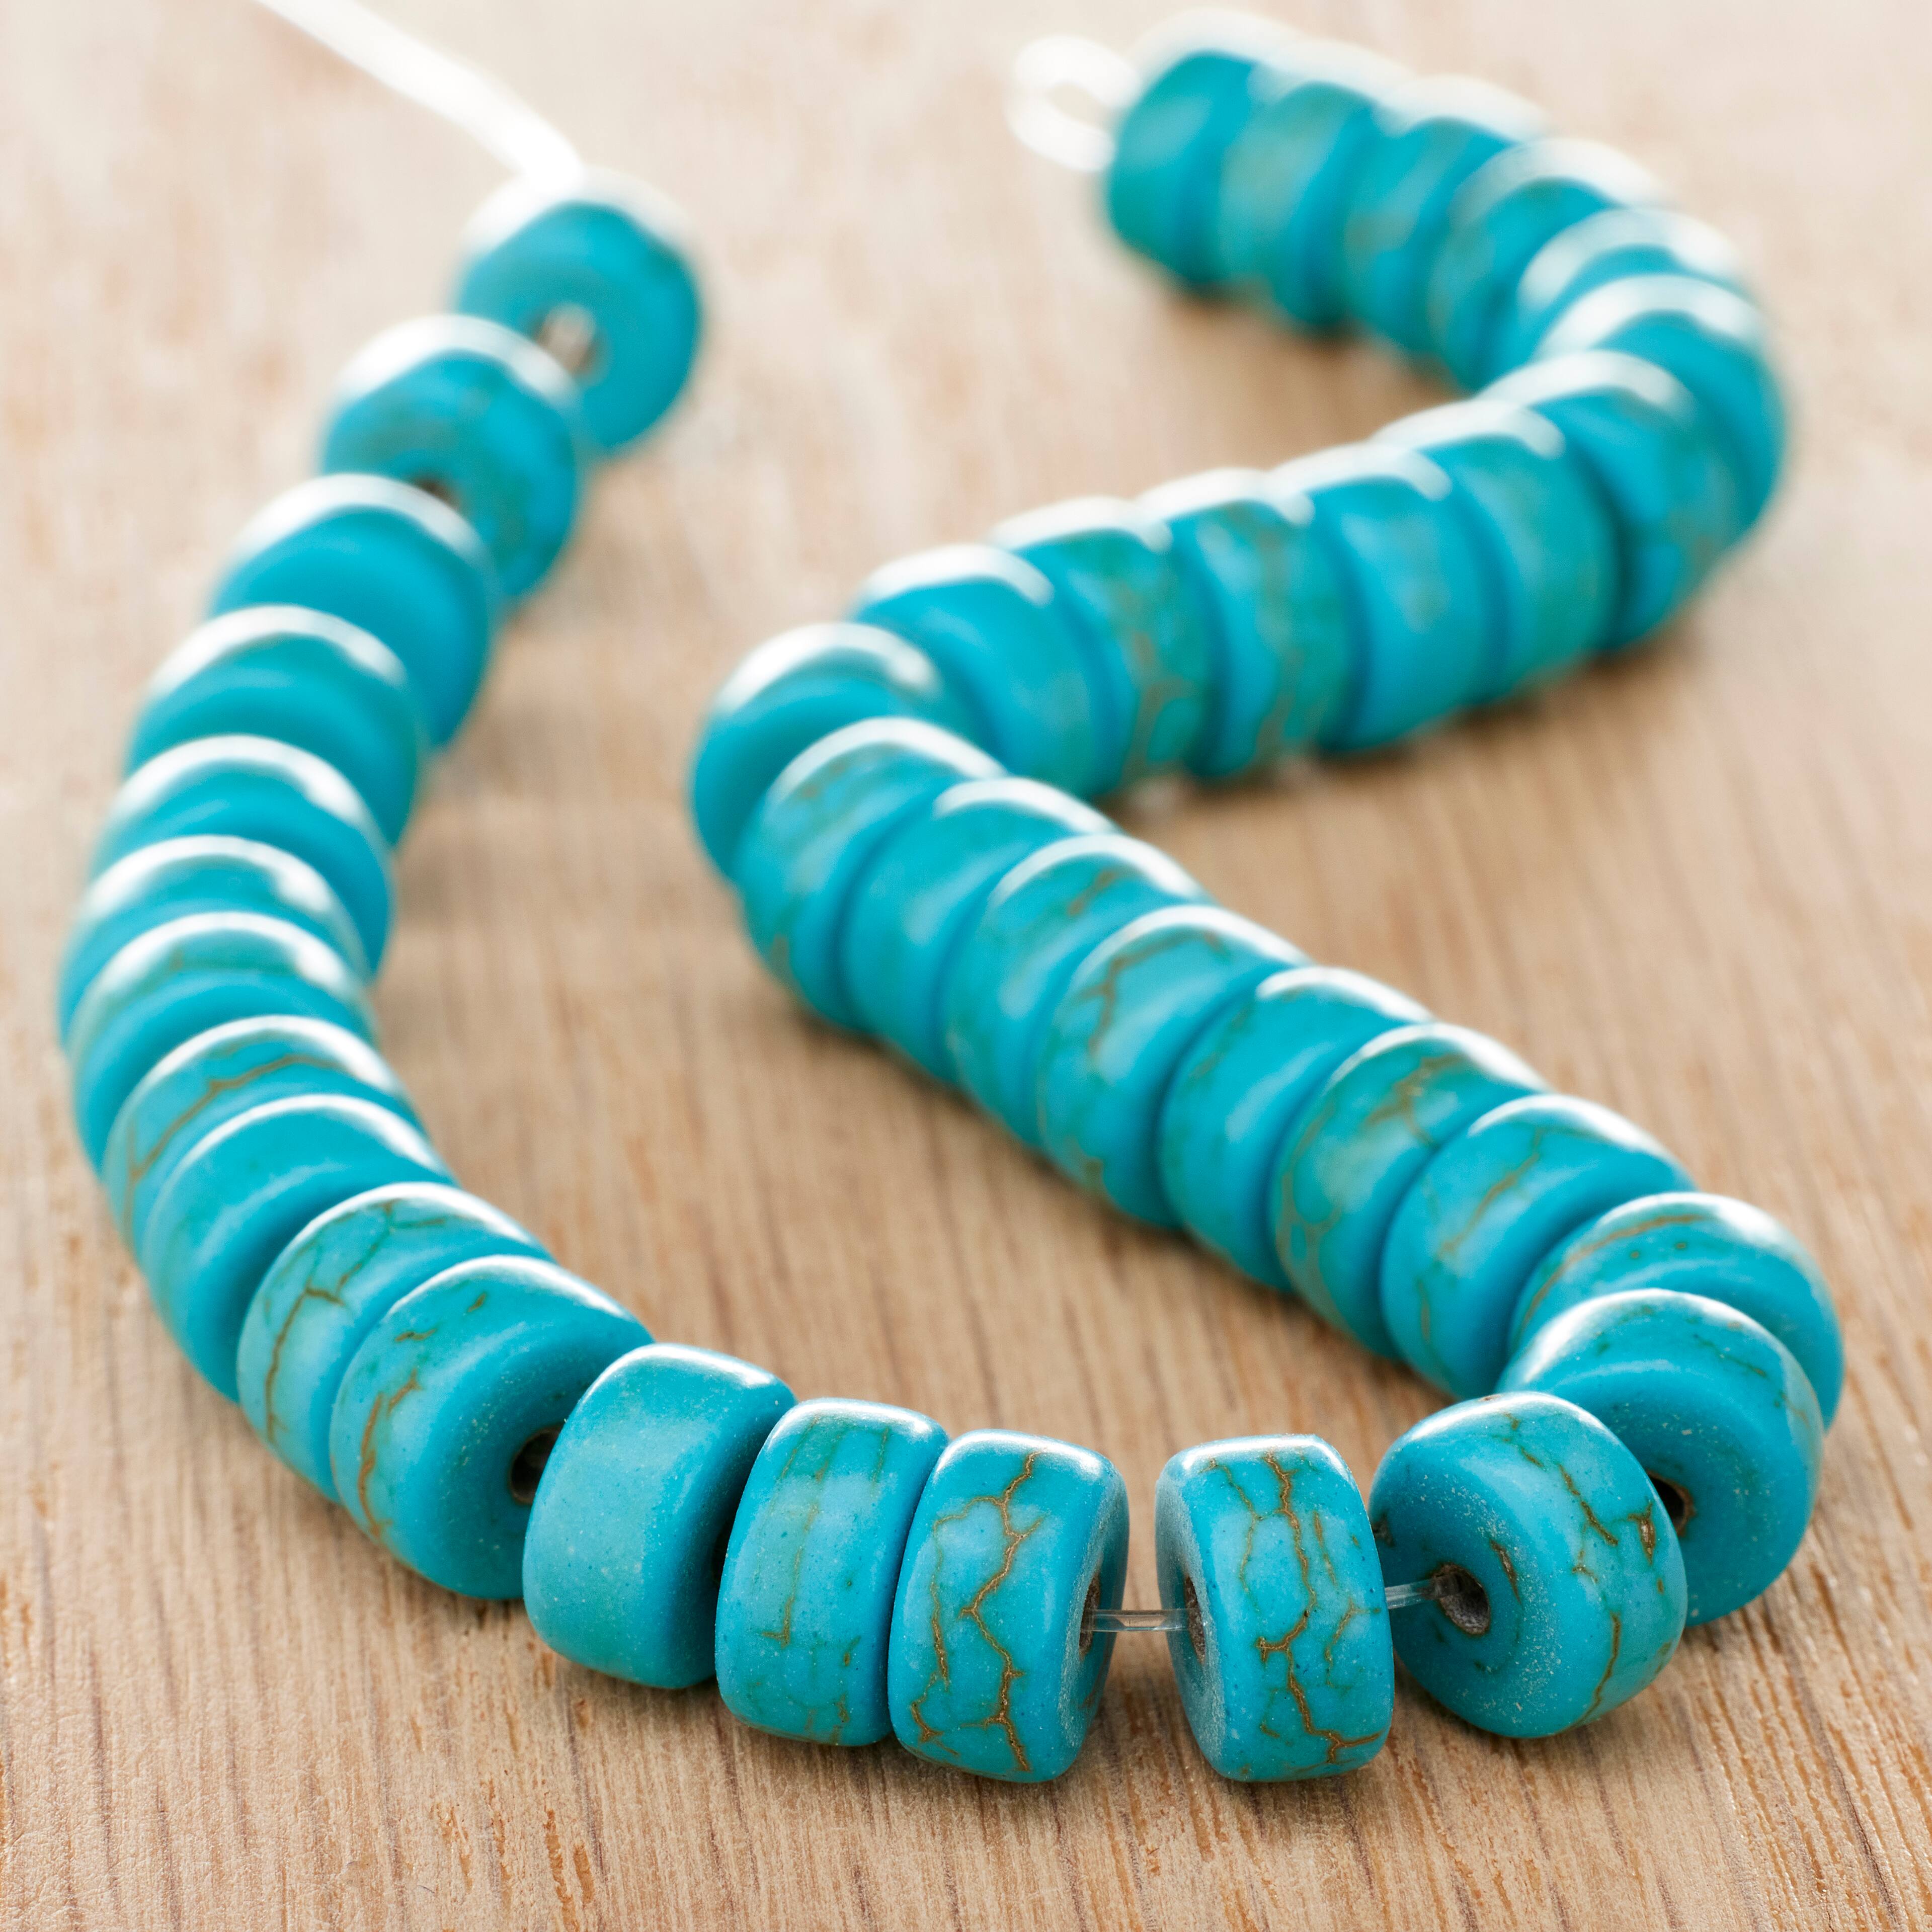 Smooth Heishi Square Fancy Beads Turquoise Strand 8 Inches Strand Howlite Turquoise Smooth Heishi Square Fancy Beads 5.5-8 MM